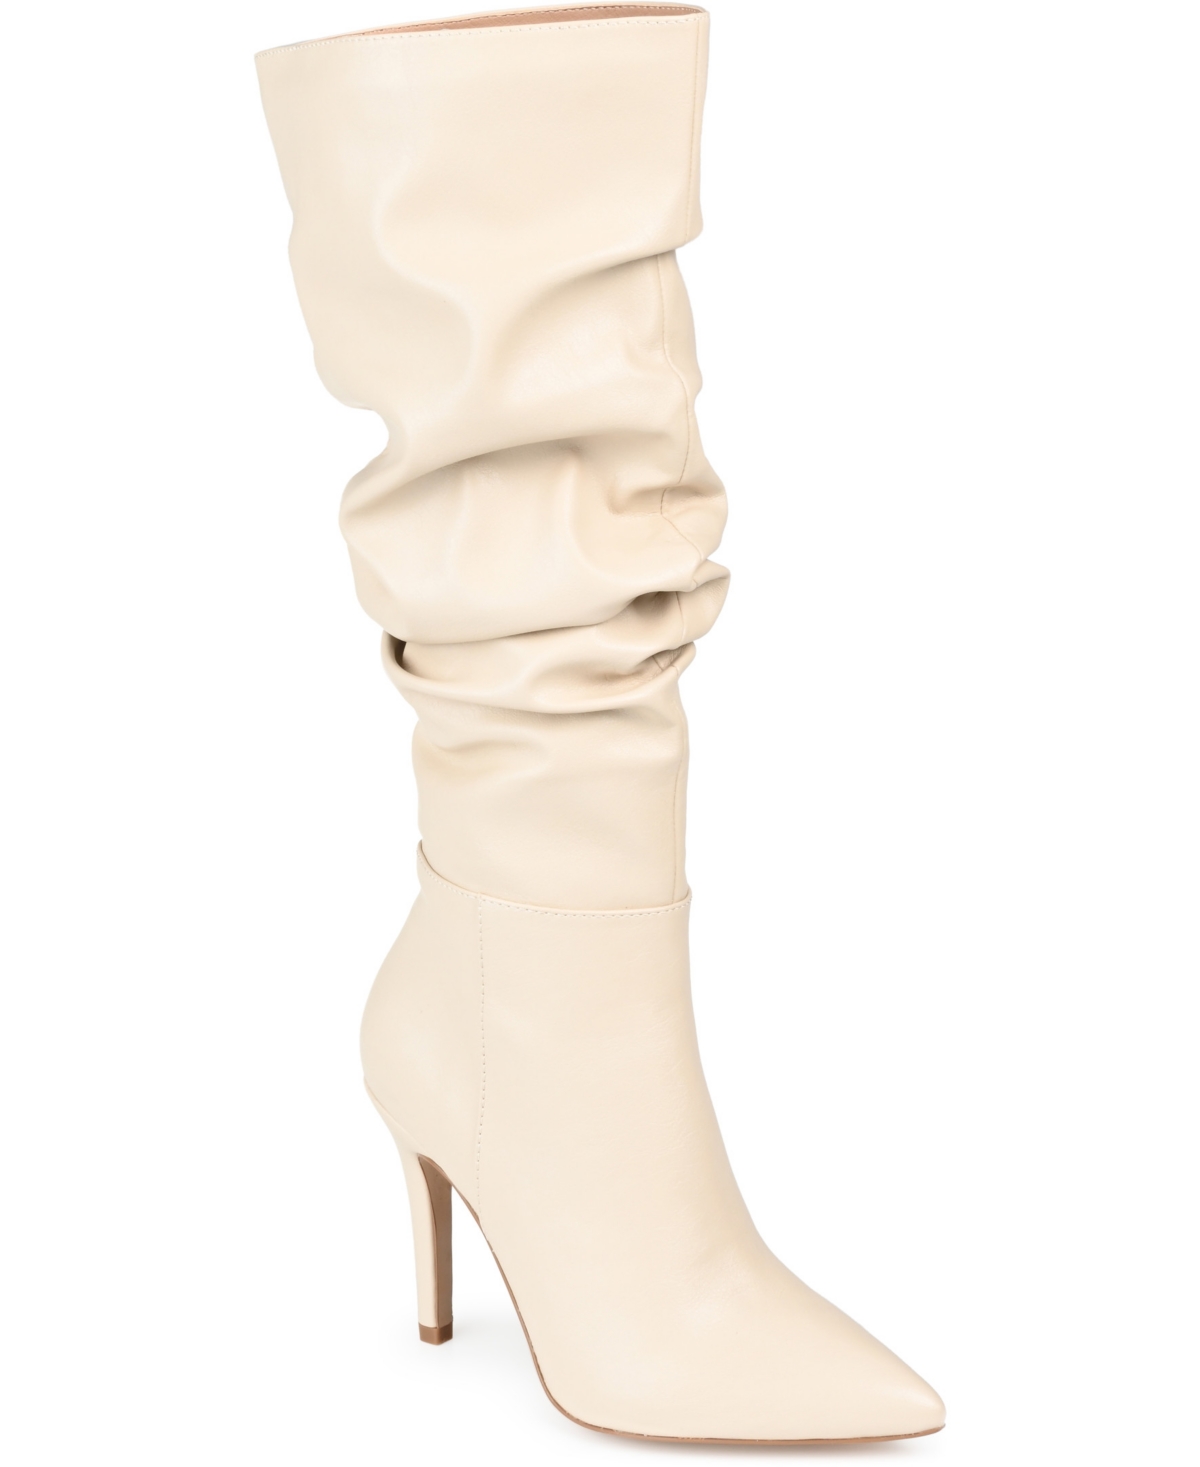 Women's Sarie Extra Wide Calf Ruched Stiletto Boots - Tan